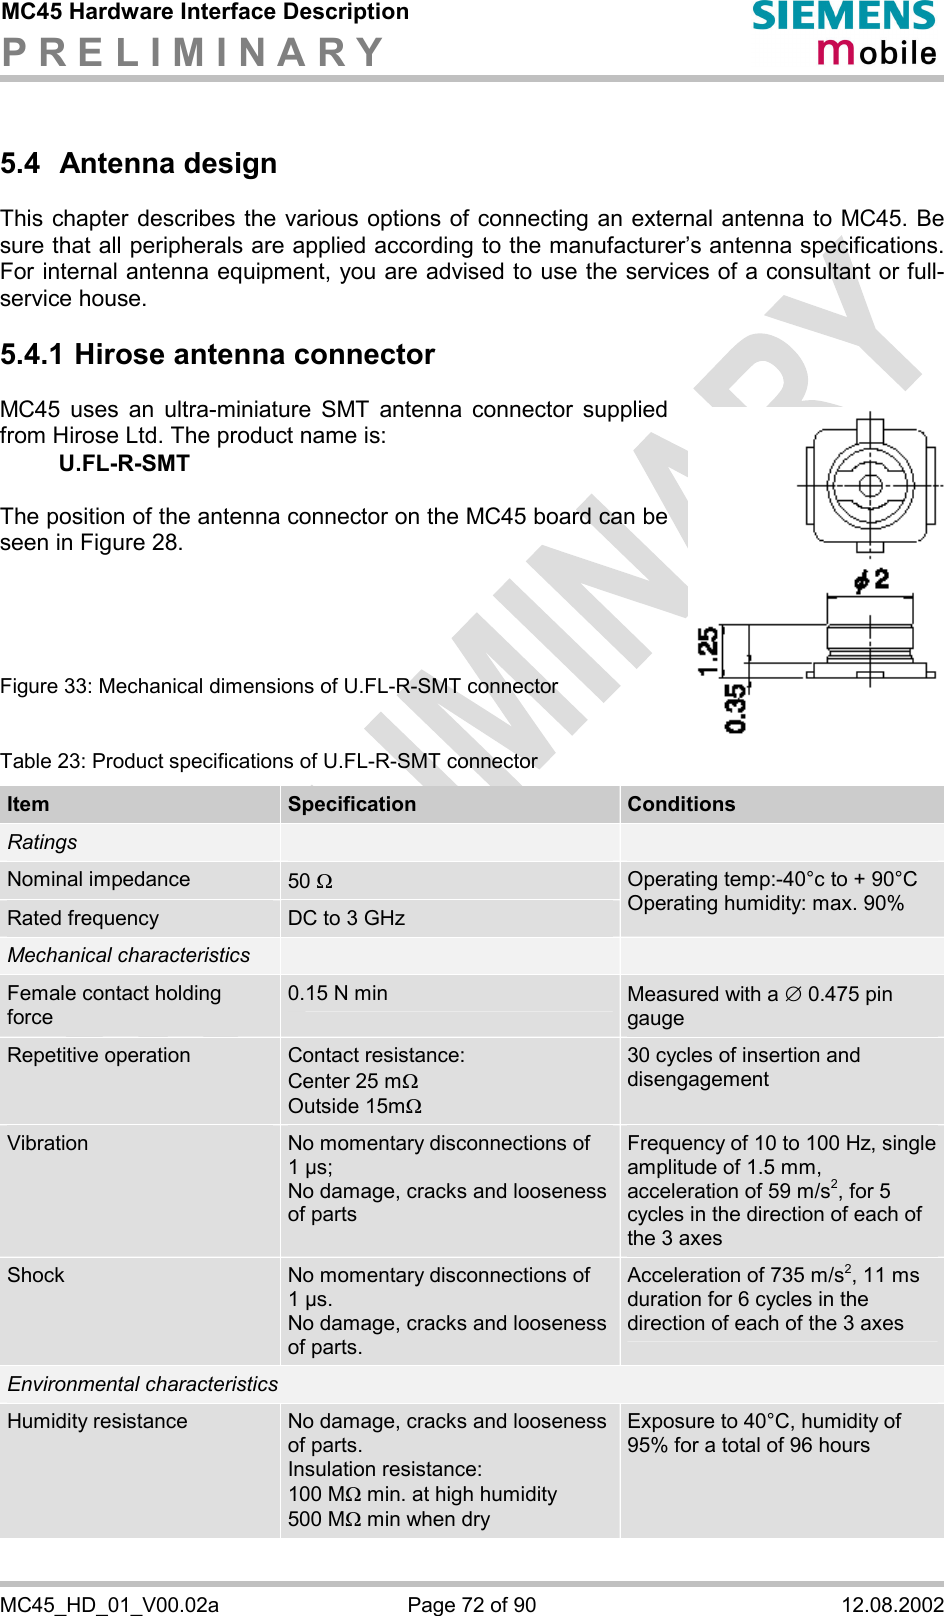 MC45 Hardware Interface Description P R E L I M I N A R Y      MC45_HD_01_V00.02a  Page 72 of 90  12.08.2002 5.4 Antenna design This chapter describes the various options of connecting an external antenna to MC45. Be sure that all peripherals are applied according to the manufacturer’s antenna specifications. For internal antenna equipment, you are advised to use the services of a consultant or full-service house. 5.4.1 Hirose antenna connector MC45 uses an ultra-miniature SMT antenna connector supplied from Hirose Ltd. The product name is:  U.FL-R-SMT   The position of the antenna connector on the MC45 board can be seen in Figure 28.      Figure 33: Mechanical dimensions of U.FL-R-SMT connector   Table 23: Product specifications of U.FL-R-SMT connector Item  Specification  Conditions Ratings     Nominal impedance  50 W Rated frequency  DC to 3 GHz Operating temp:-40°c to + 90°C Operating humidity: max. 90% Mechanical characteristics     Female contact holding force 0.15 N min  Measured with a Æ 0.475 pin gauge Repetitive operation  Contact resistance: Center 25 mW  Outside 15mW 30 cycles of insertion and disengagement Vibration  No momentary disconnections of 1 µs; No damage, cracks and looseness of parts Frequency of 10 to 100 Hz, single amplitude of 1.5 mm, acceleration of 59 m/s2, for 5 cycles in the direction of each of the 3 axes Shock  No momentary disconnections of 1 µs. No damage, cracks and looseness of parts. Acceleration of 735 m/s2, 11 ms duration for 6 cycles in the direction of each of the 3 axes Environmental characteristics Humidity resistance  No damage, cracks and looseness of parts. Insulation resistance:  100 MW min. at high humidity 500 MW min when dry Exposure to 40°C, humidity of 95% for a total of 96 hours 